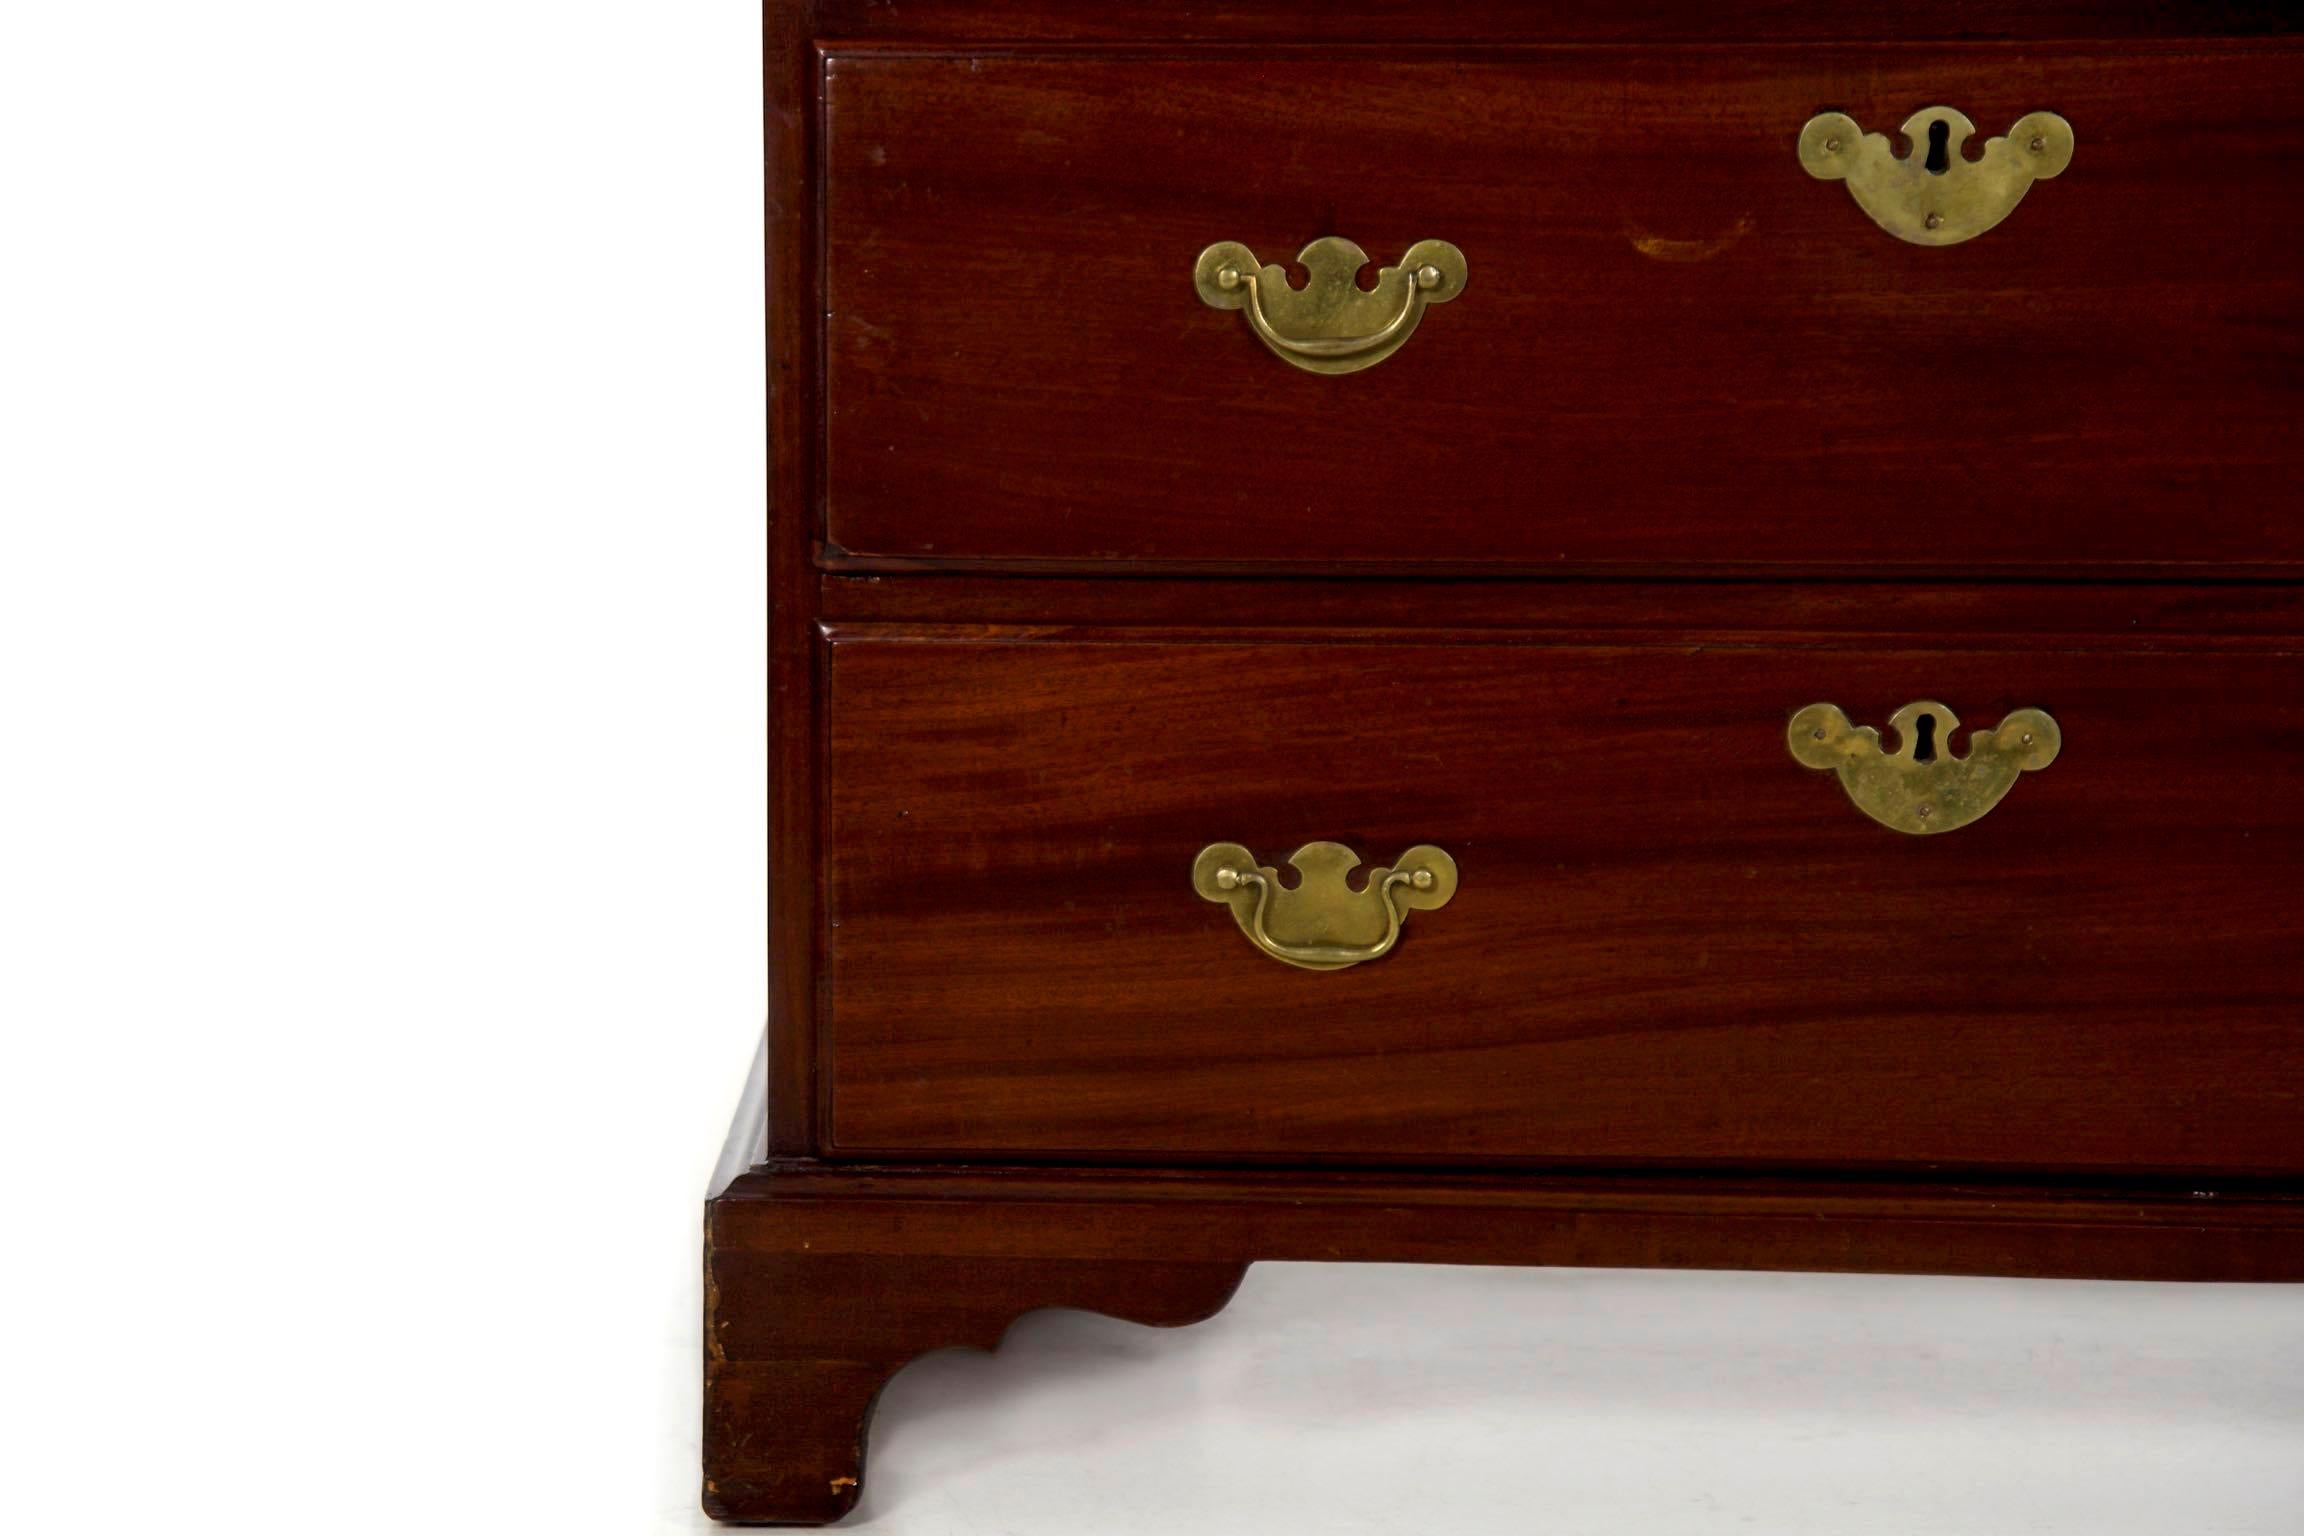 18th Century English Chippendale Mahogany Tall Chest of Drawers with Secretary Desk